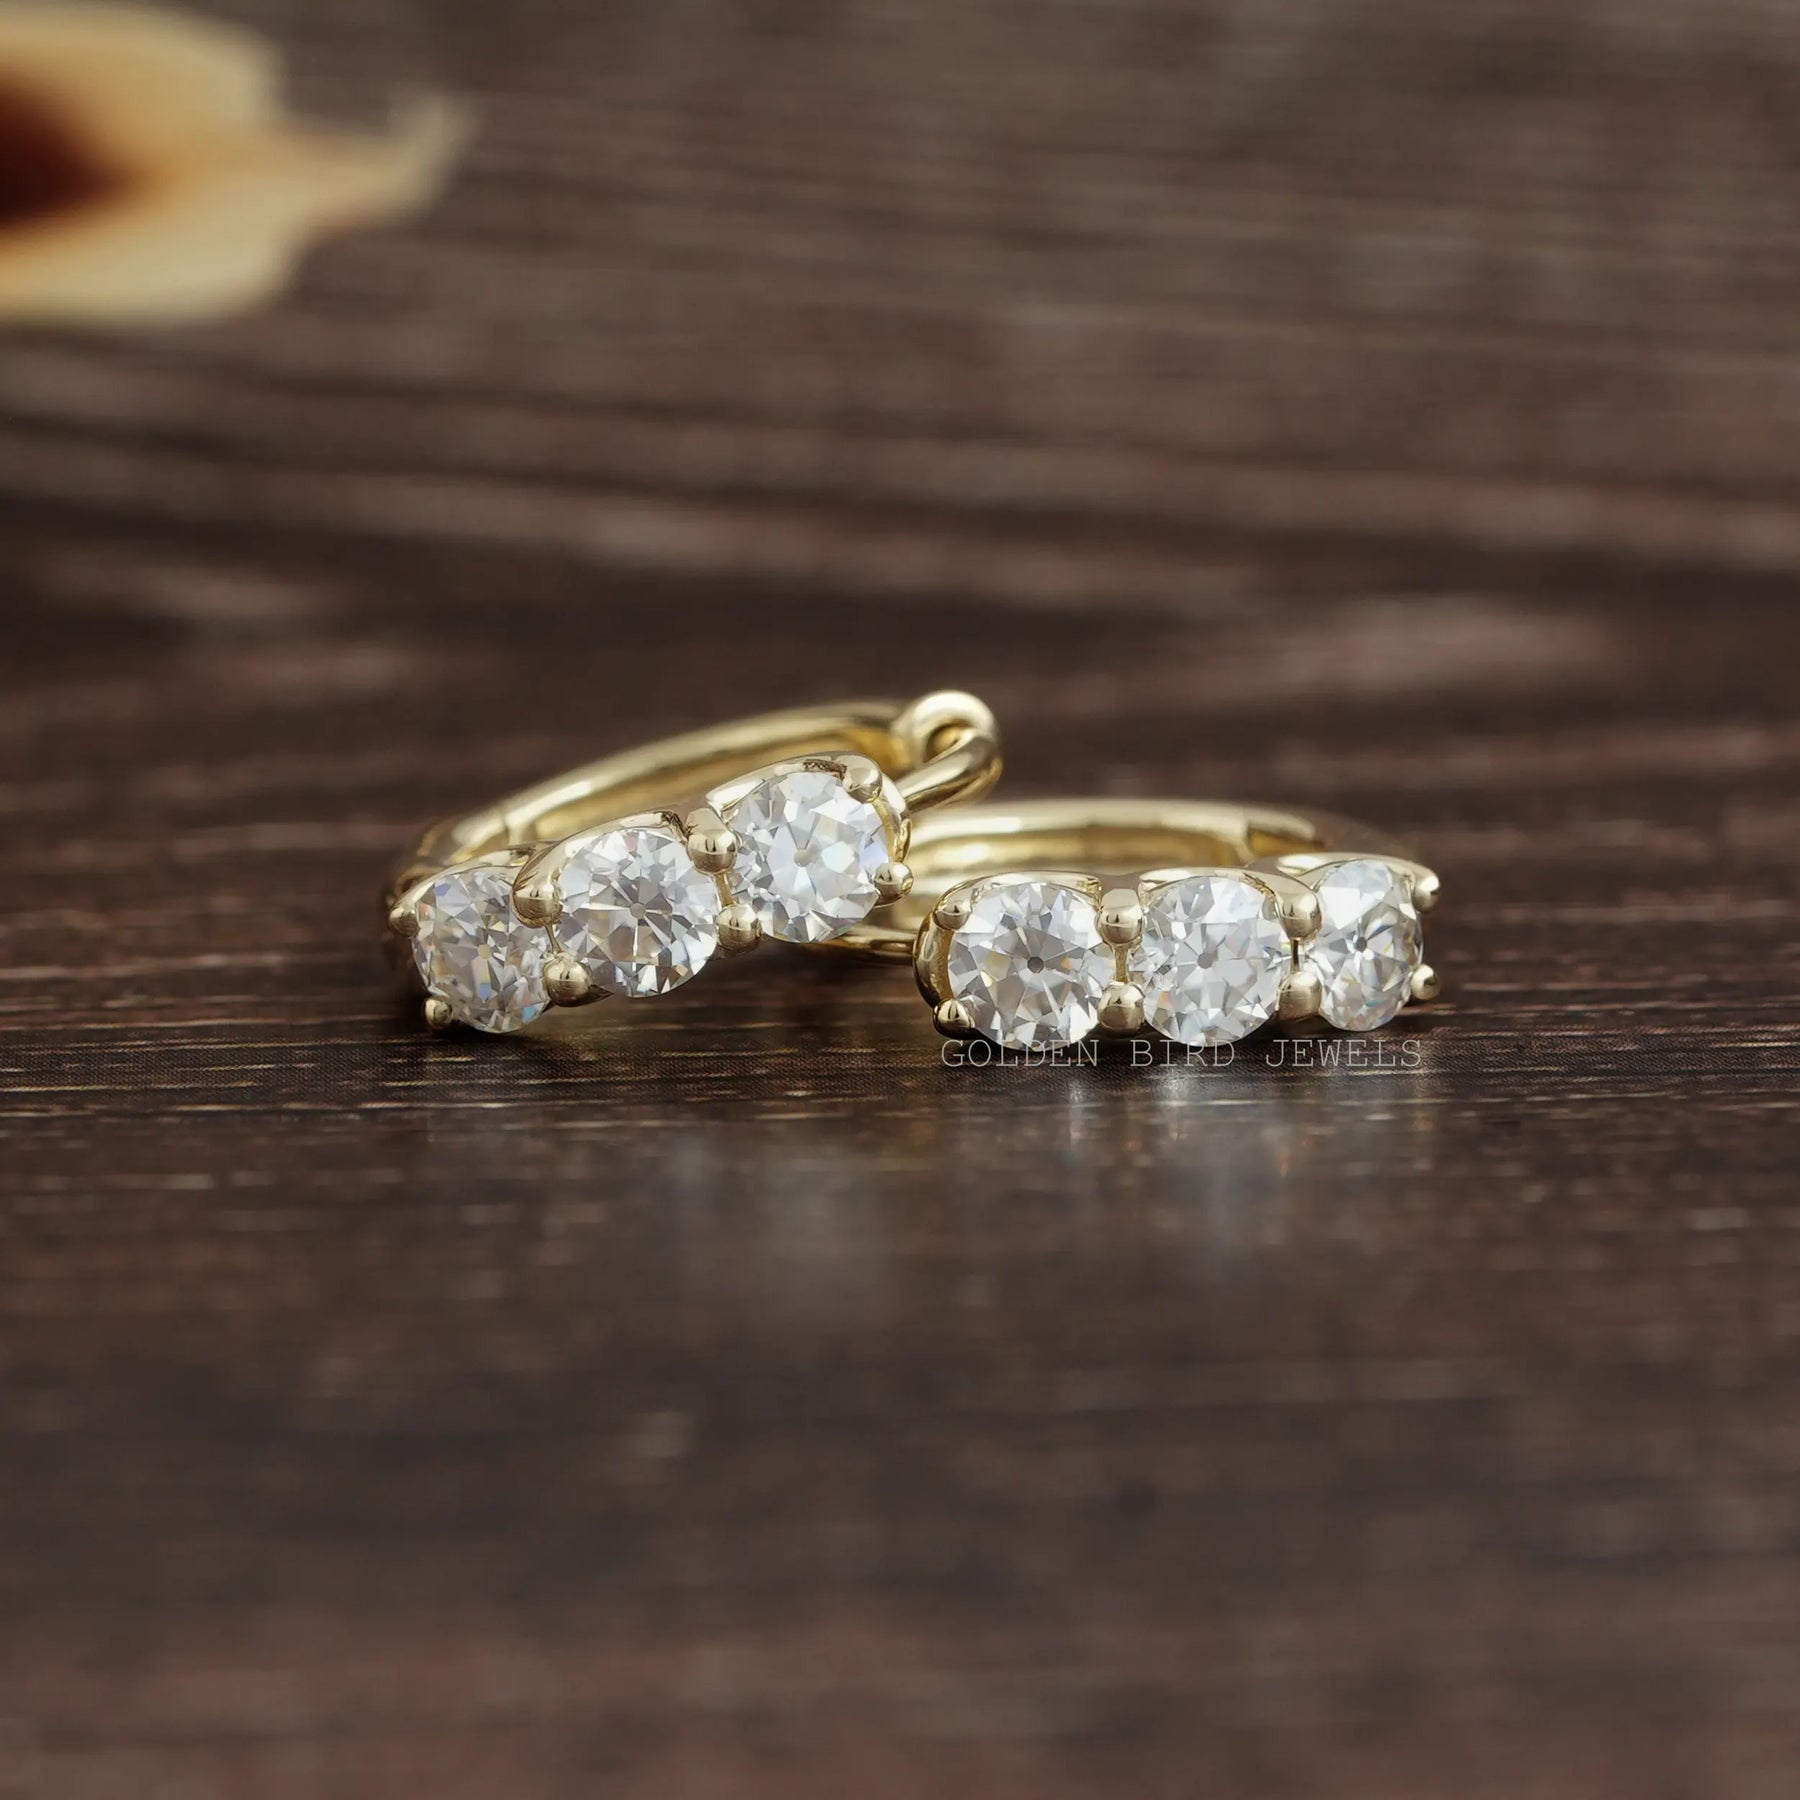 [This OEC round moissanite earrings made of yellow gold]-[Golden Bird Jewels]